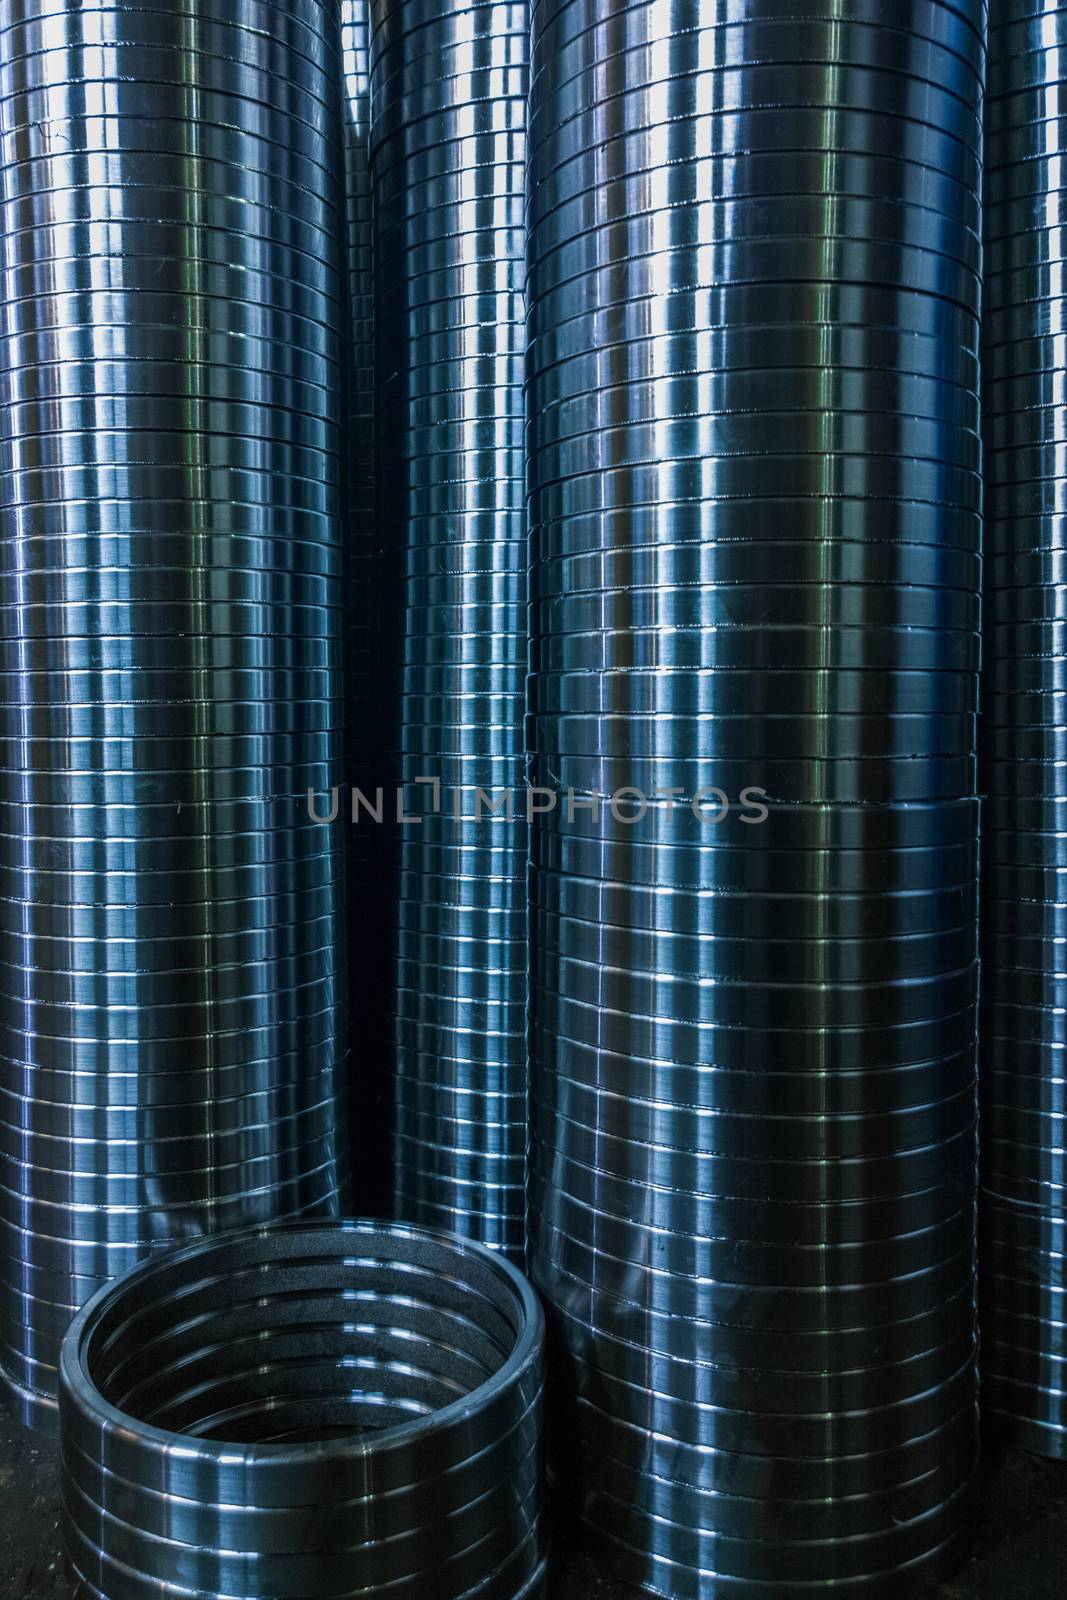 industrial manufacturing background of columns of shiny metal rings after cnc turning operation by z1b